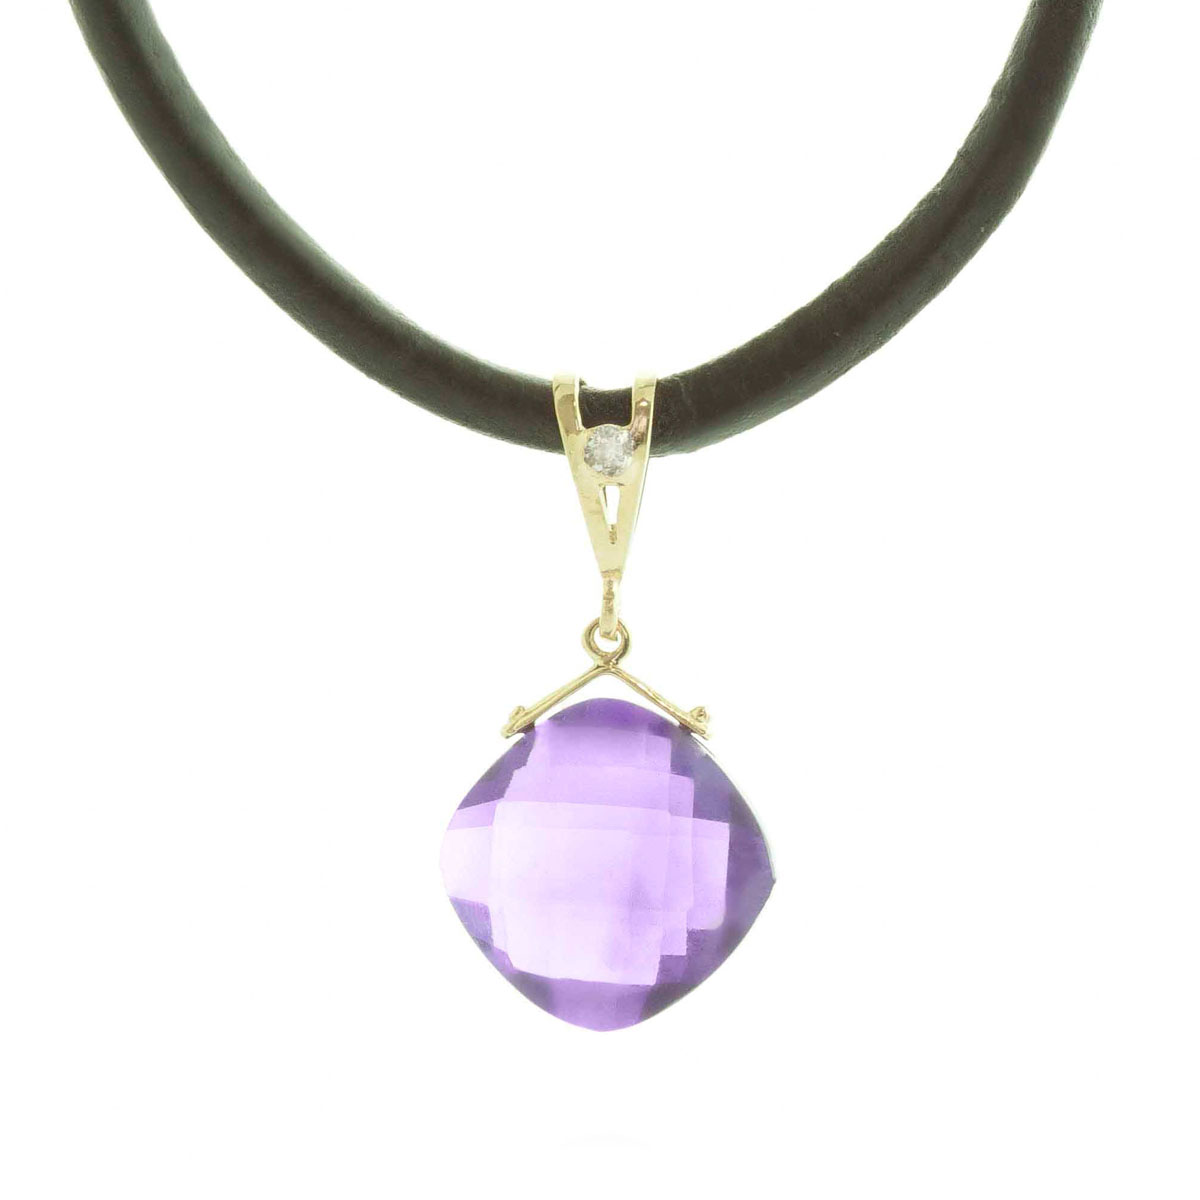 Amethyst Leather Pendant Necklace 8.76 ctw in 9ct Gold